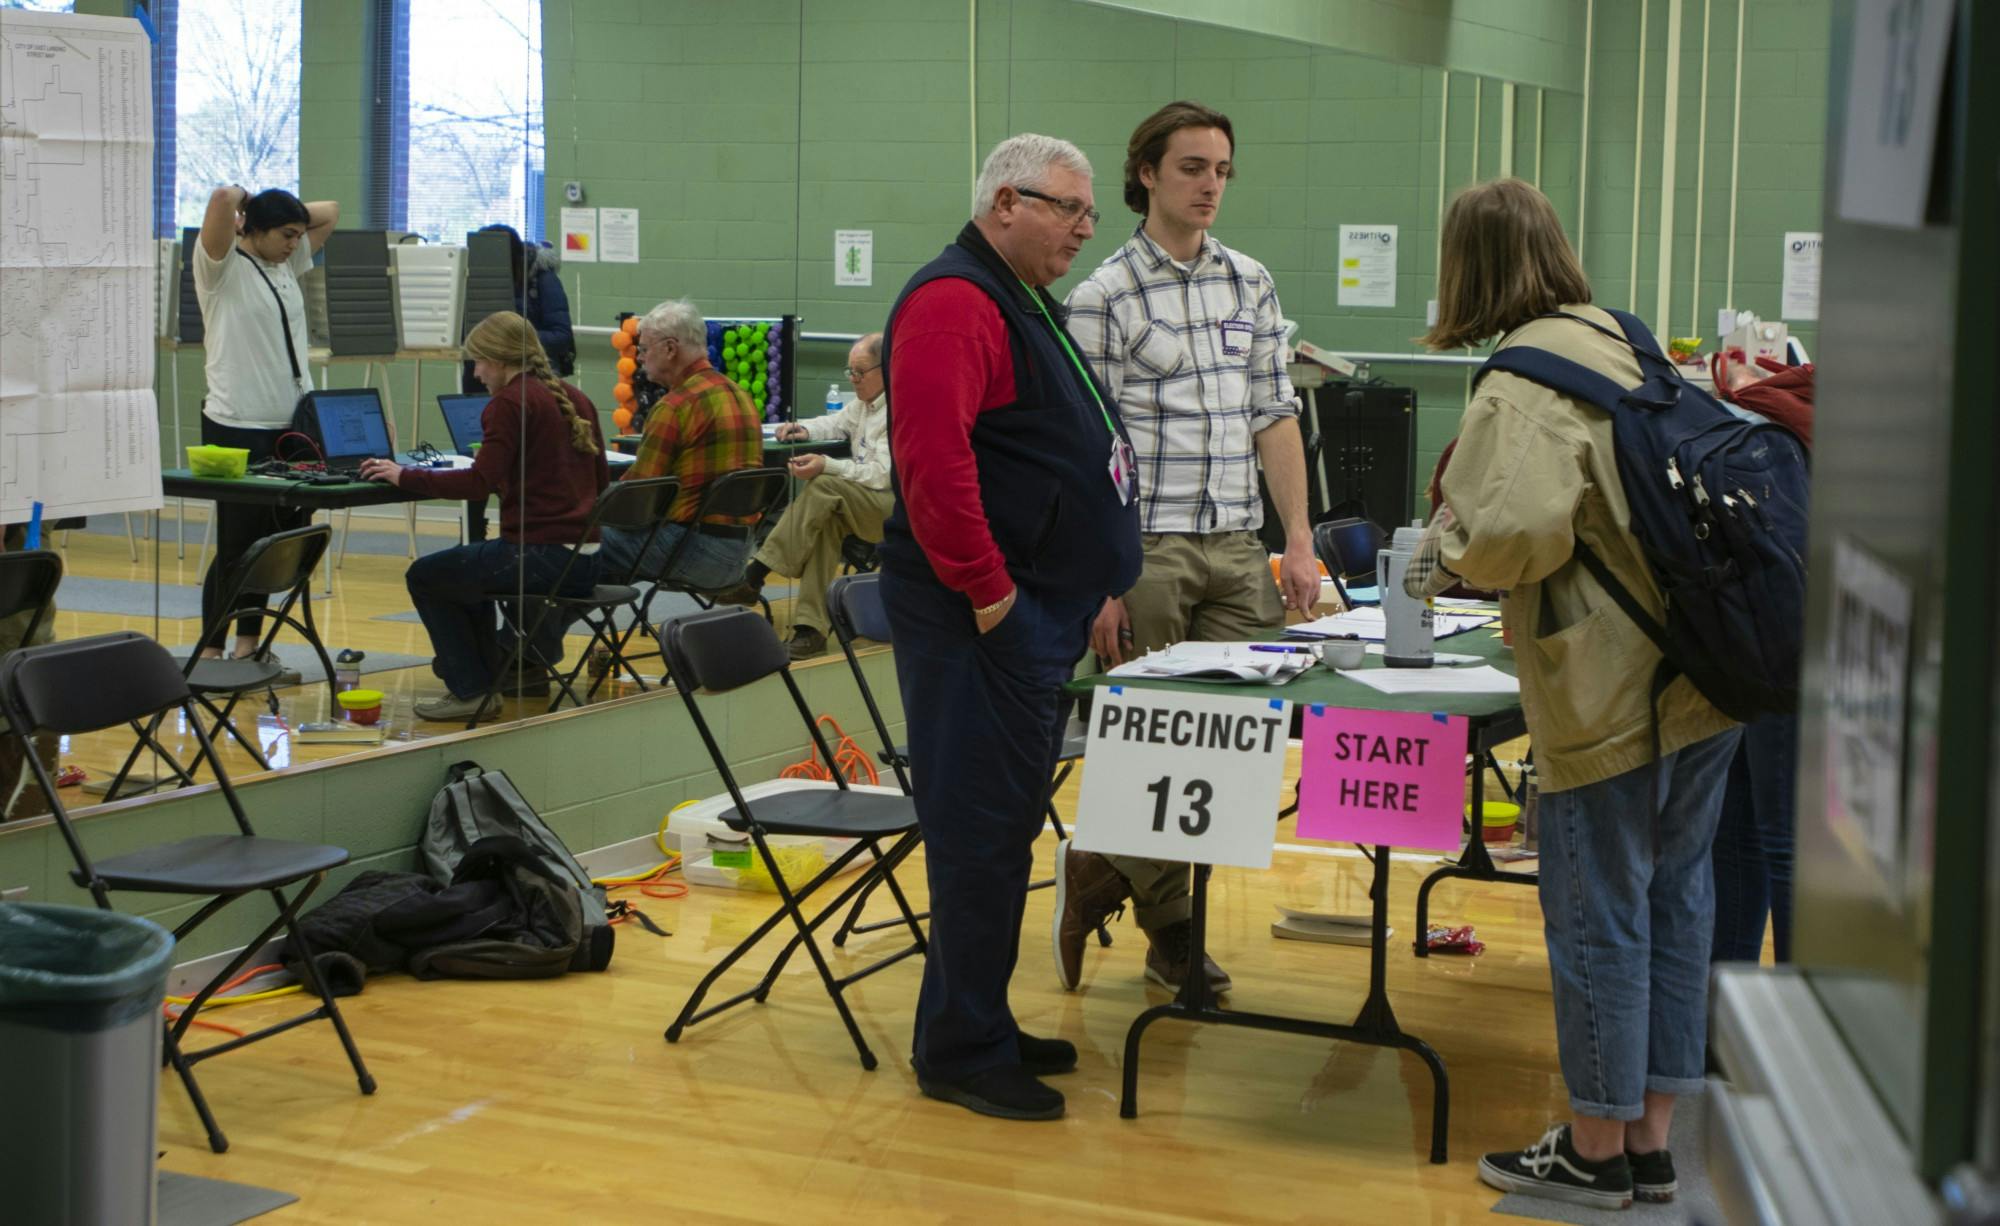 <p>Volunteers help students during their voting process at the District 13 polling precinct in IM Sports East. The Michigan primary day took place March 10, 2020.</p>